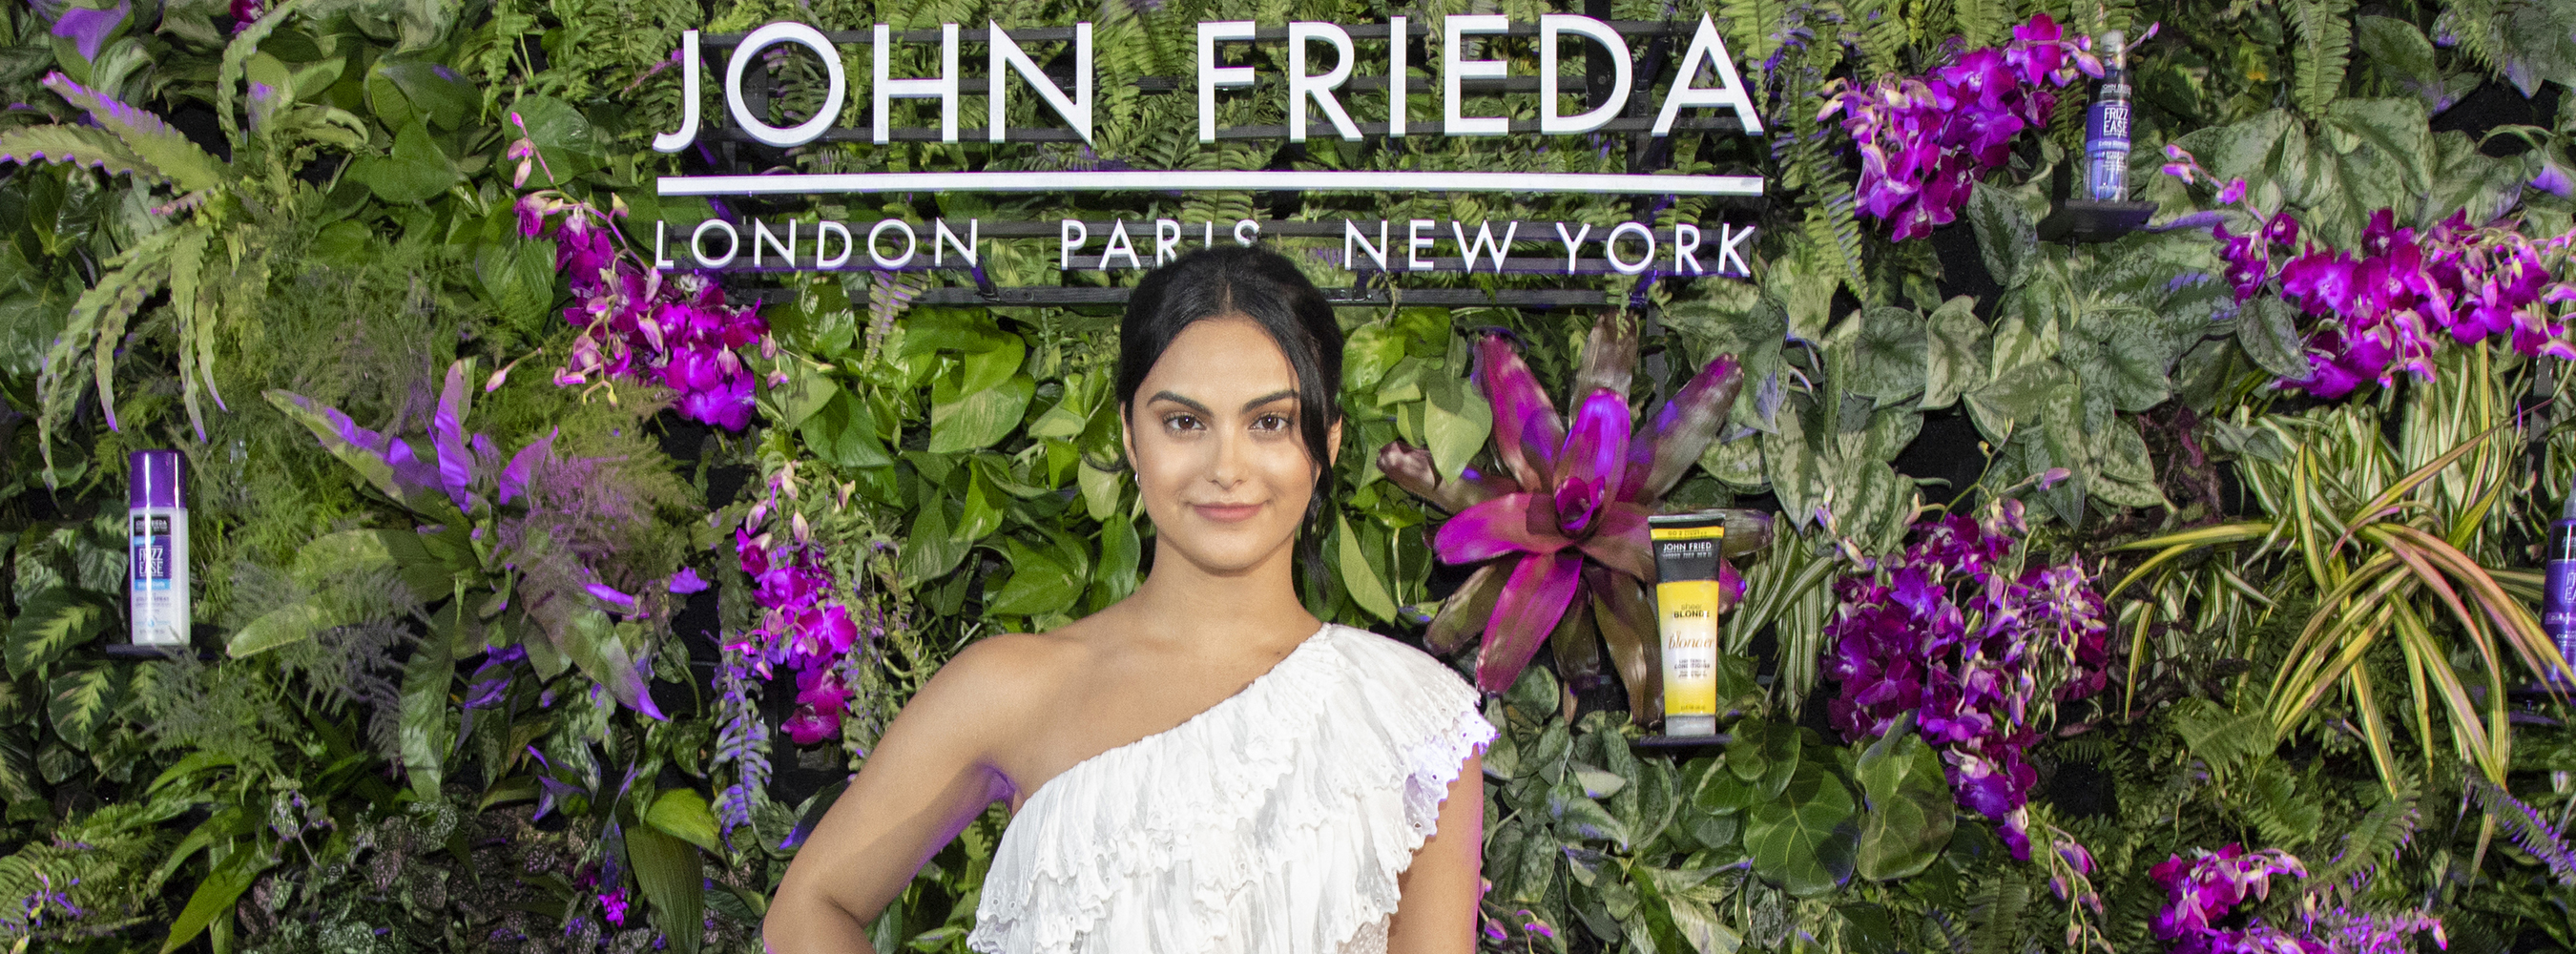 Banner image of Camila Mendes standing in front of a hedge wall